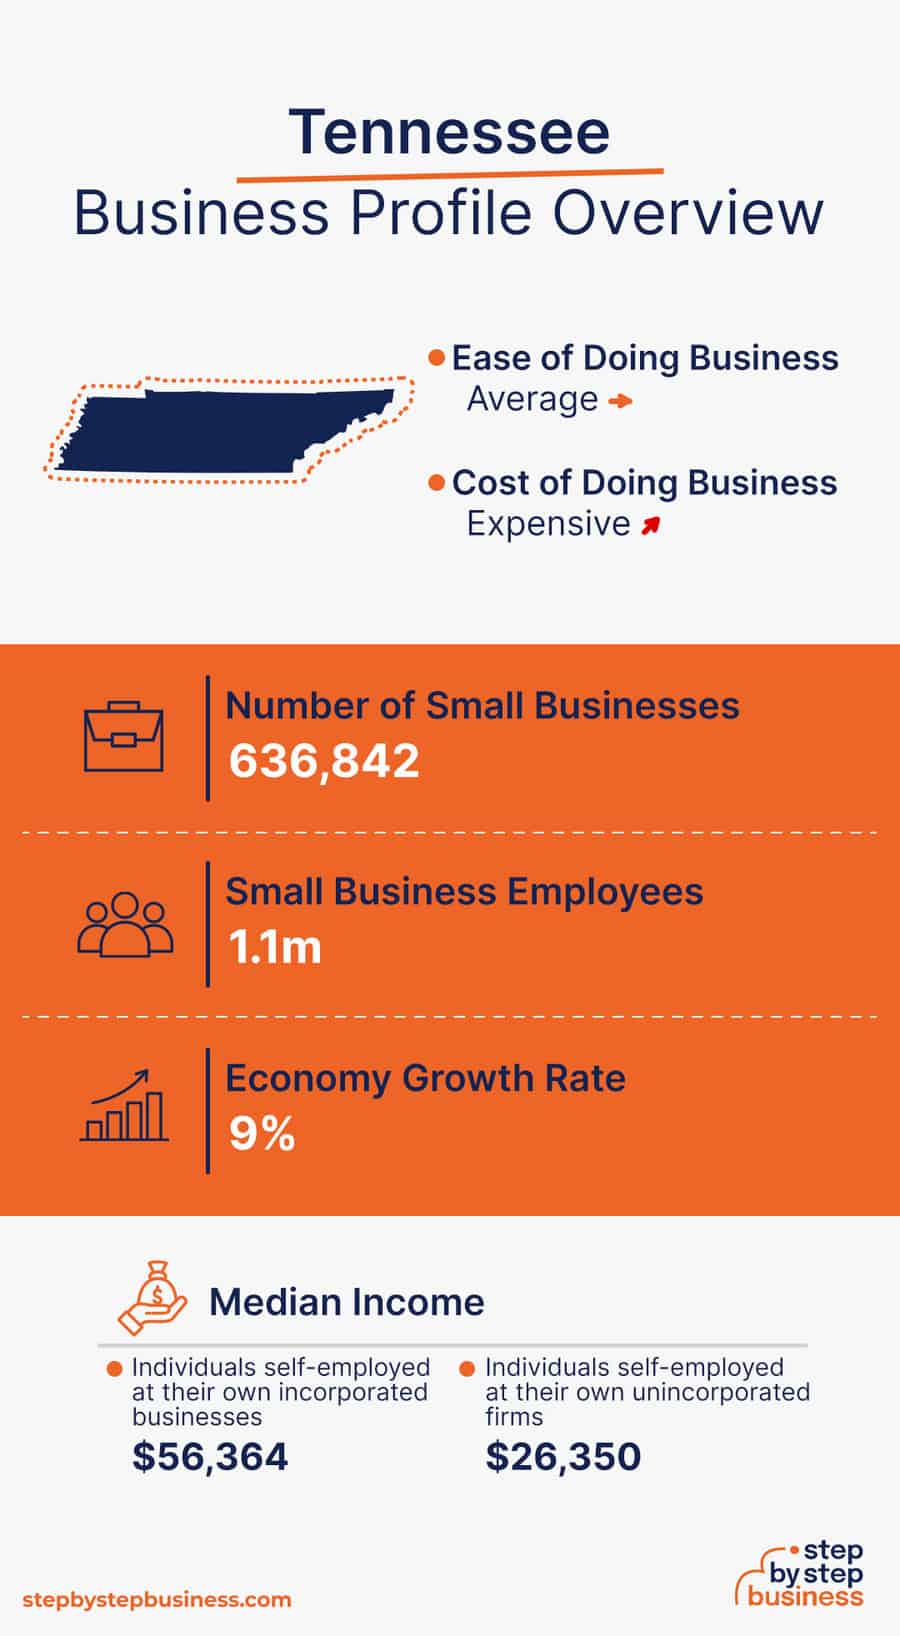 Tennessee Business Profile Overview